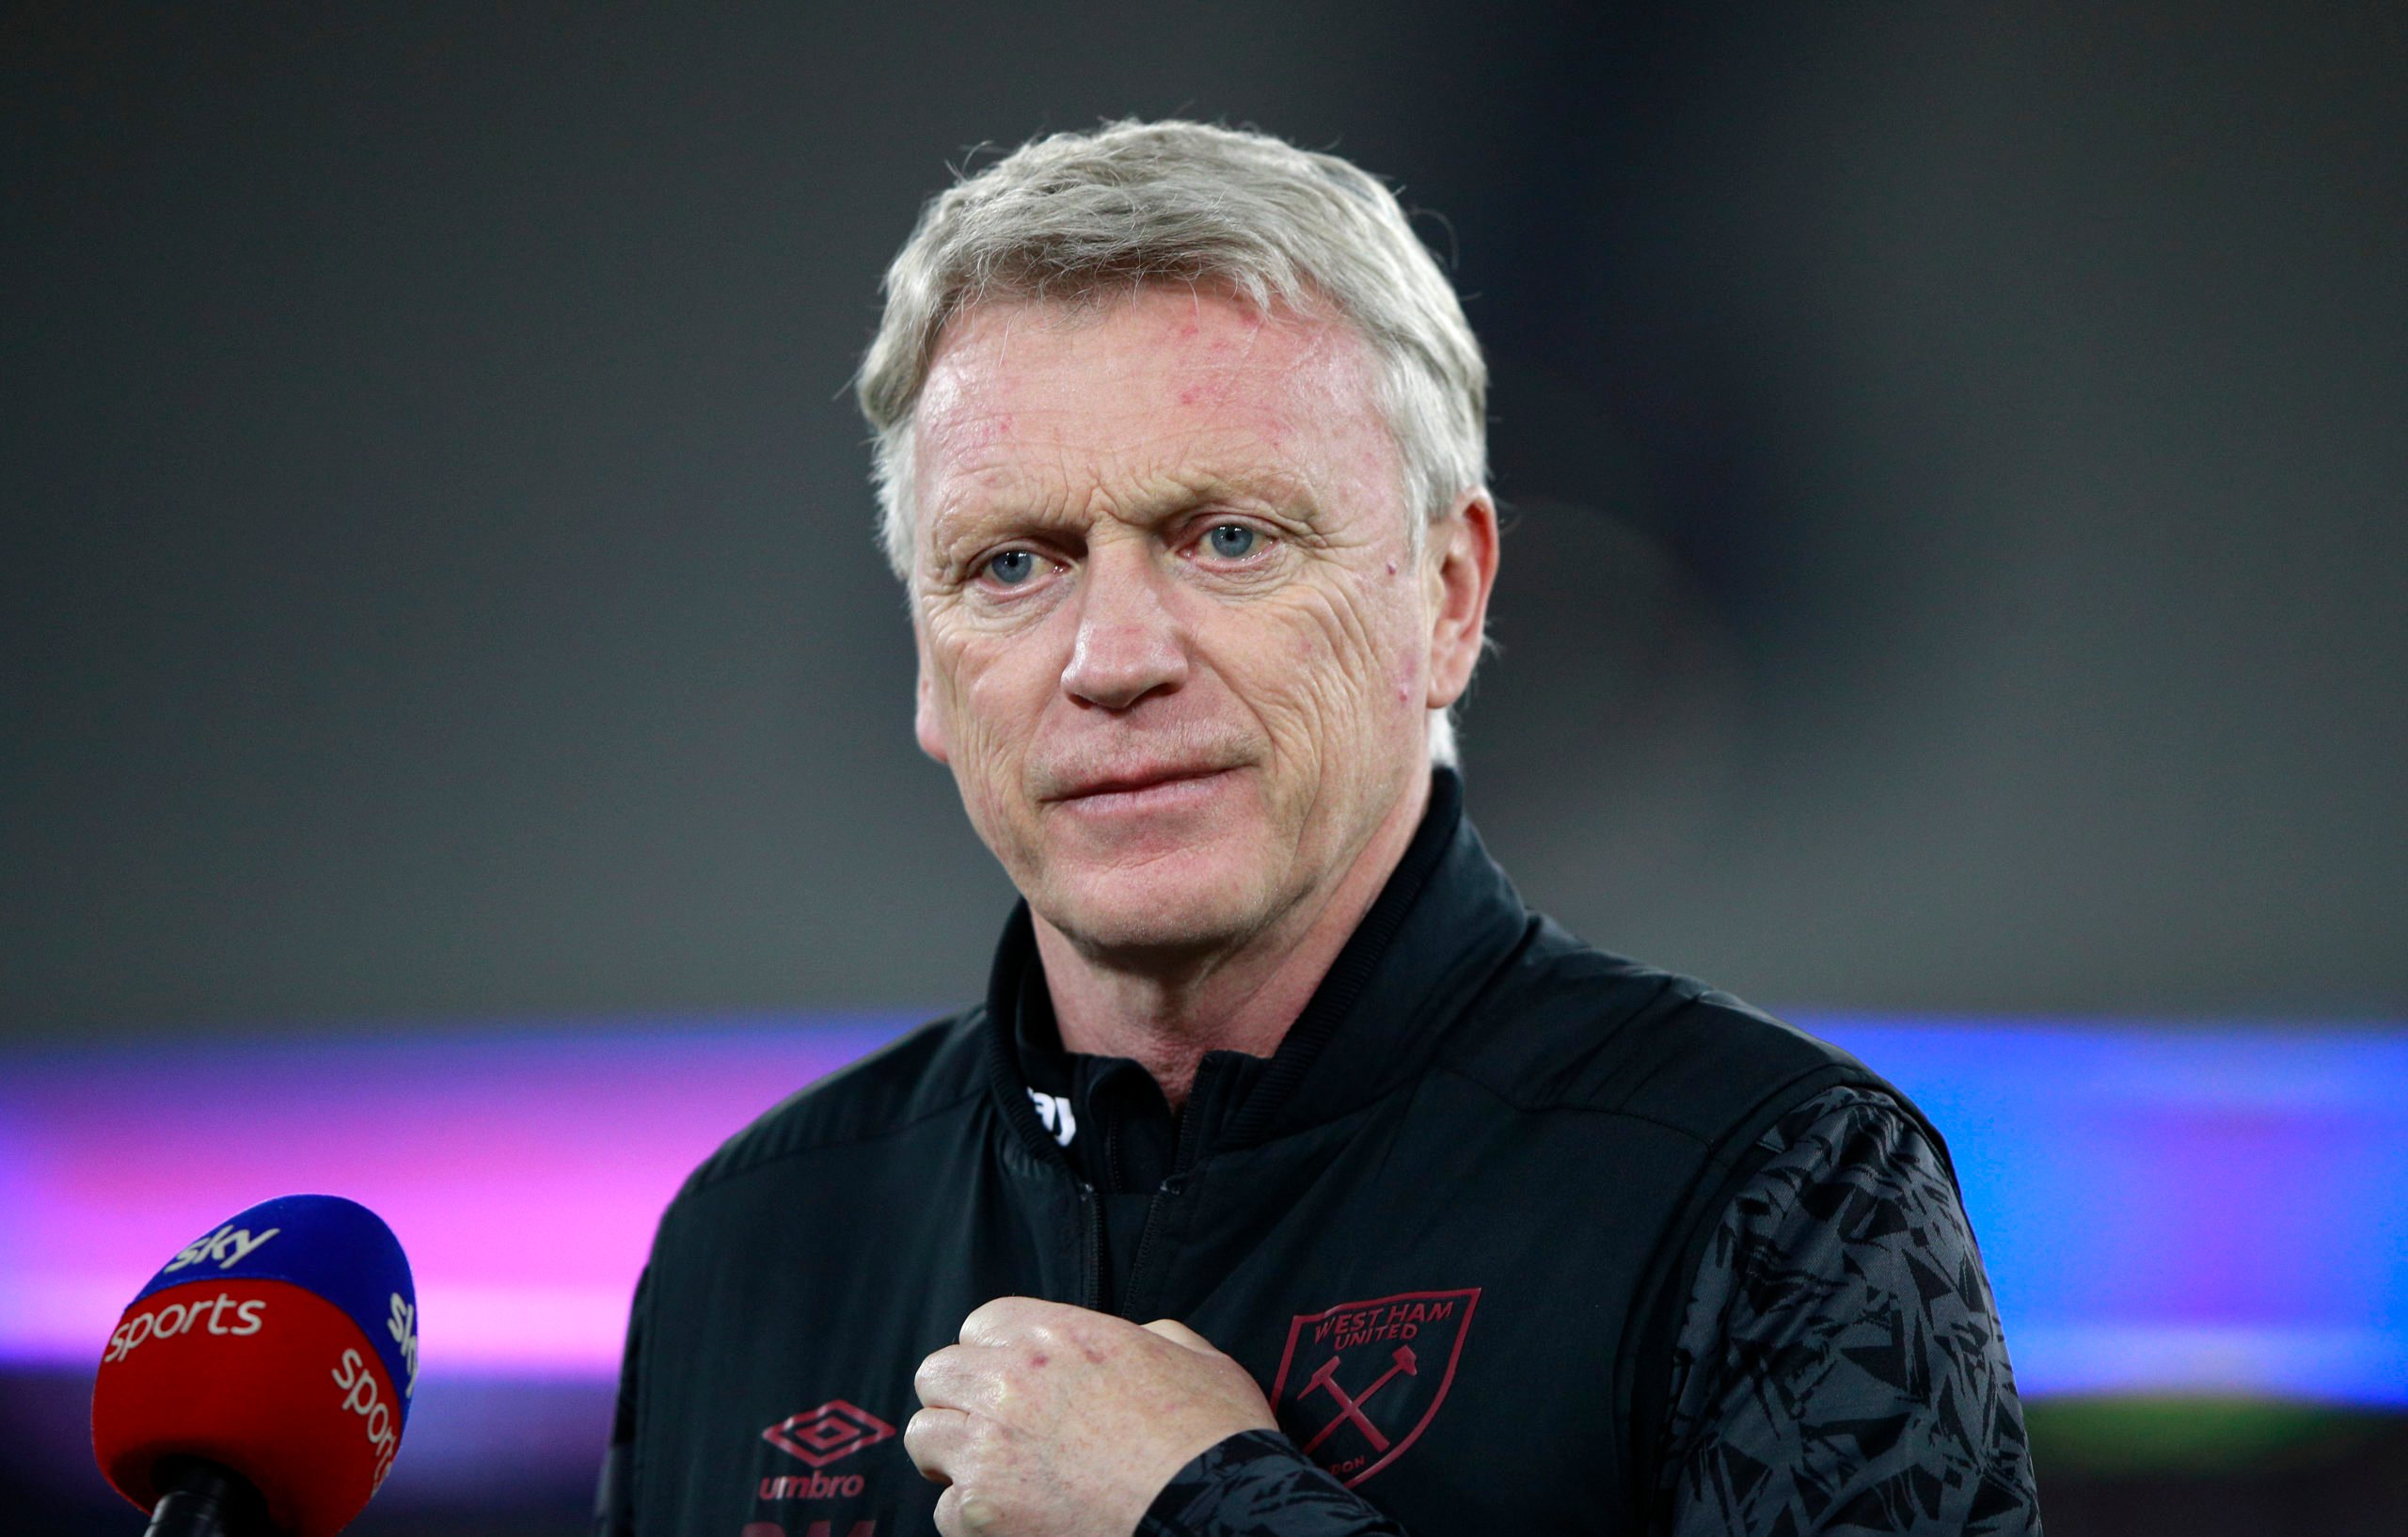 David Moyes gives reporter short shrift over Liverpool question he was asked in West Ham press conference